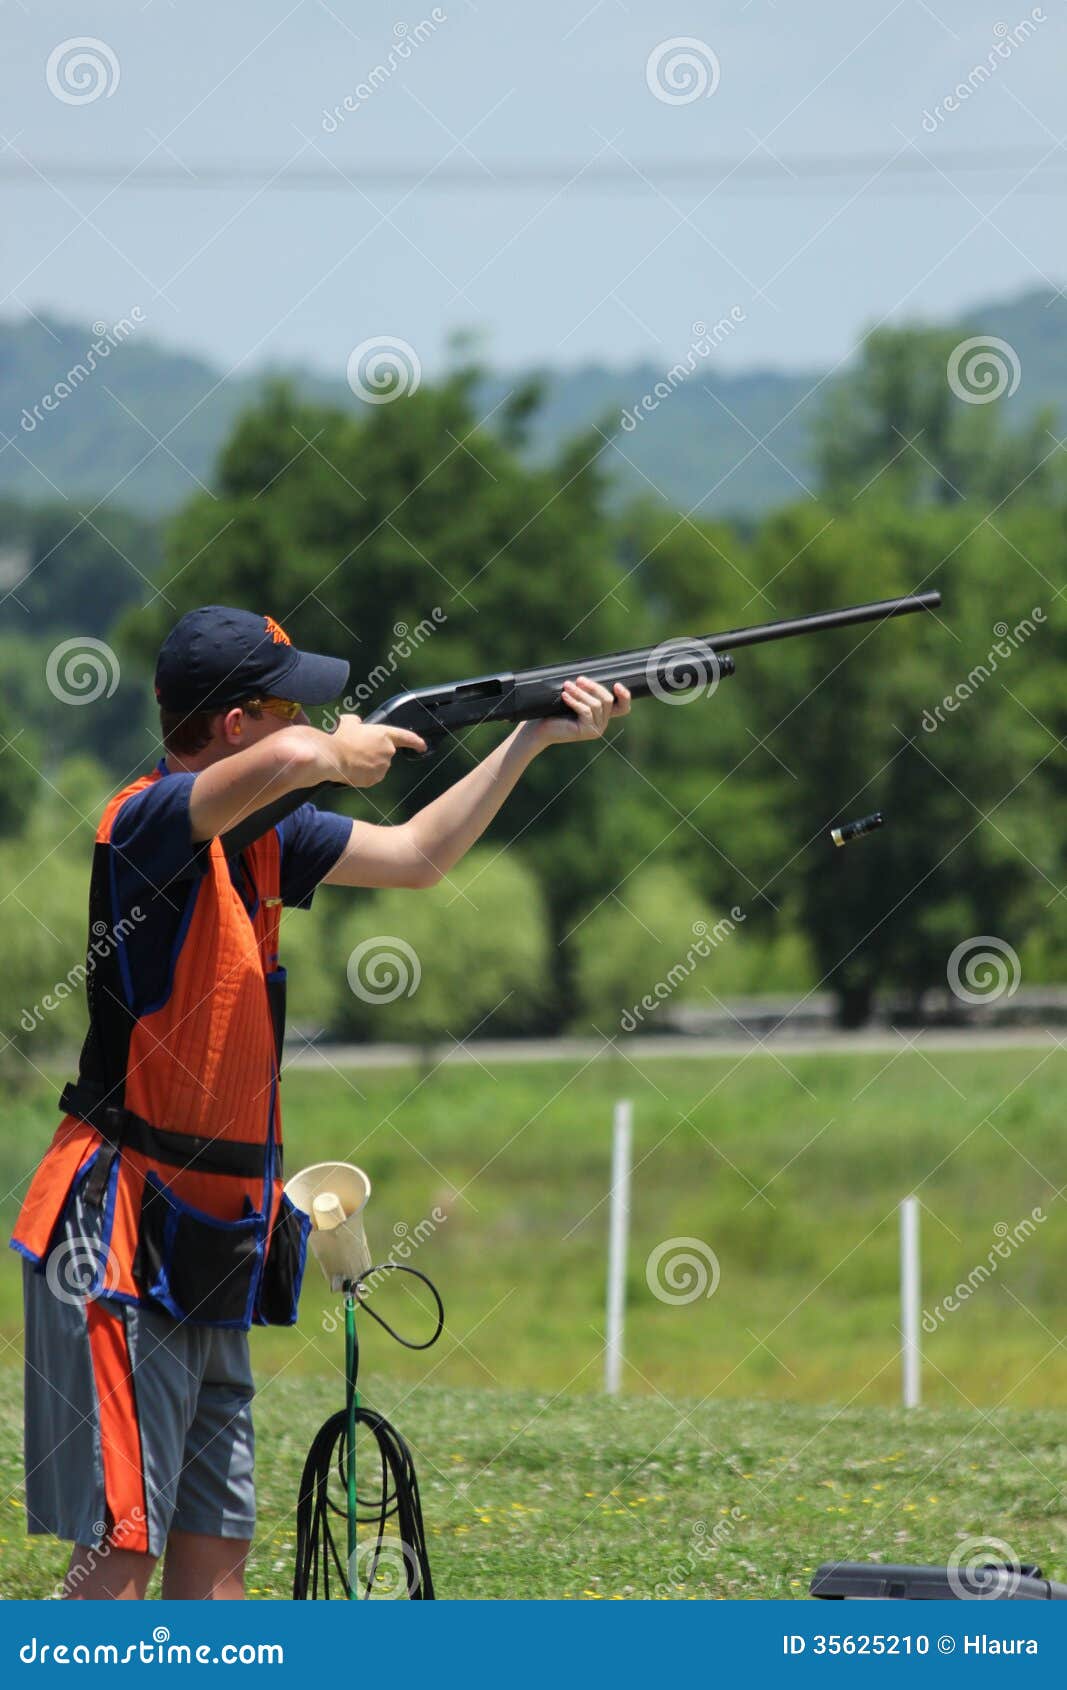 young man skeet shooting with airborne shell